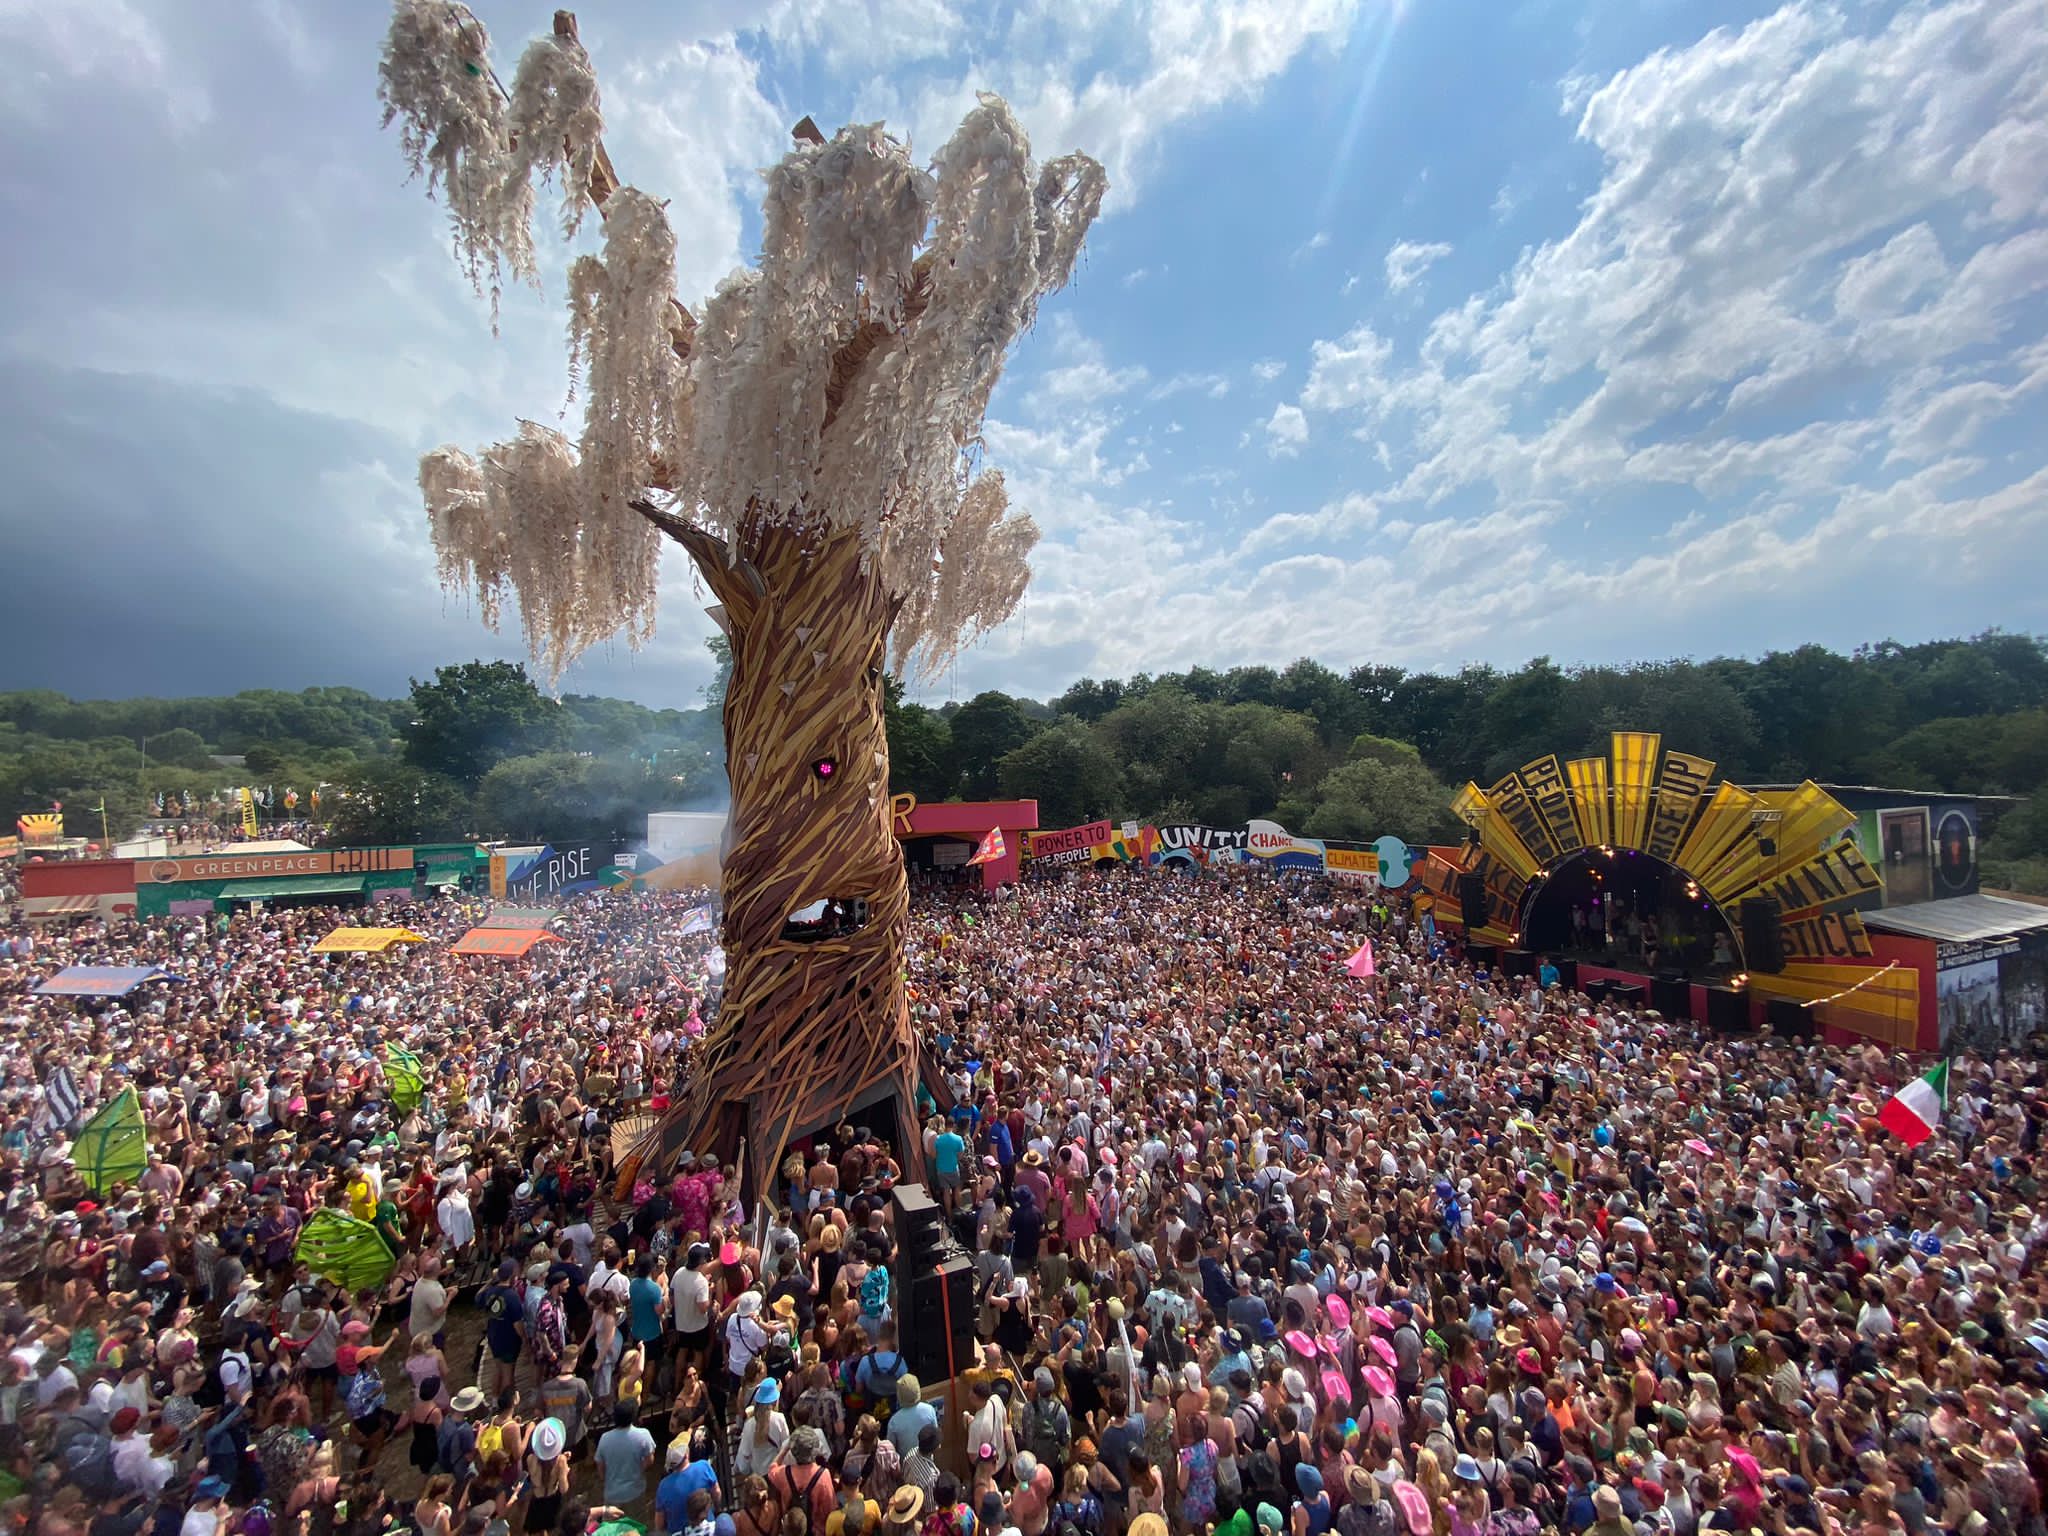 Fat Boy Slim performs in the Rave Tree at Glastonbury’s Greenpeace field, 2023